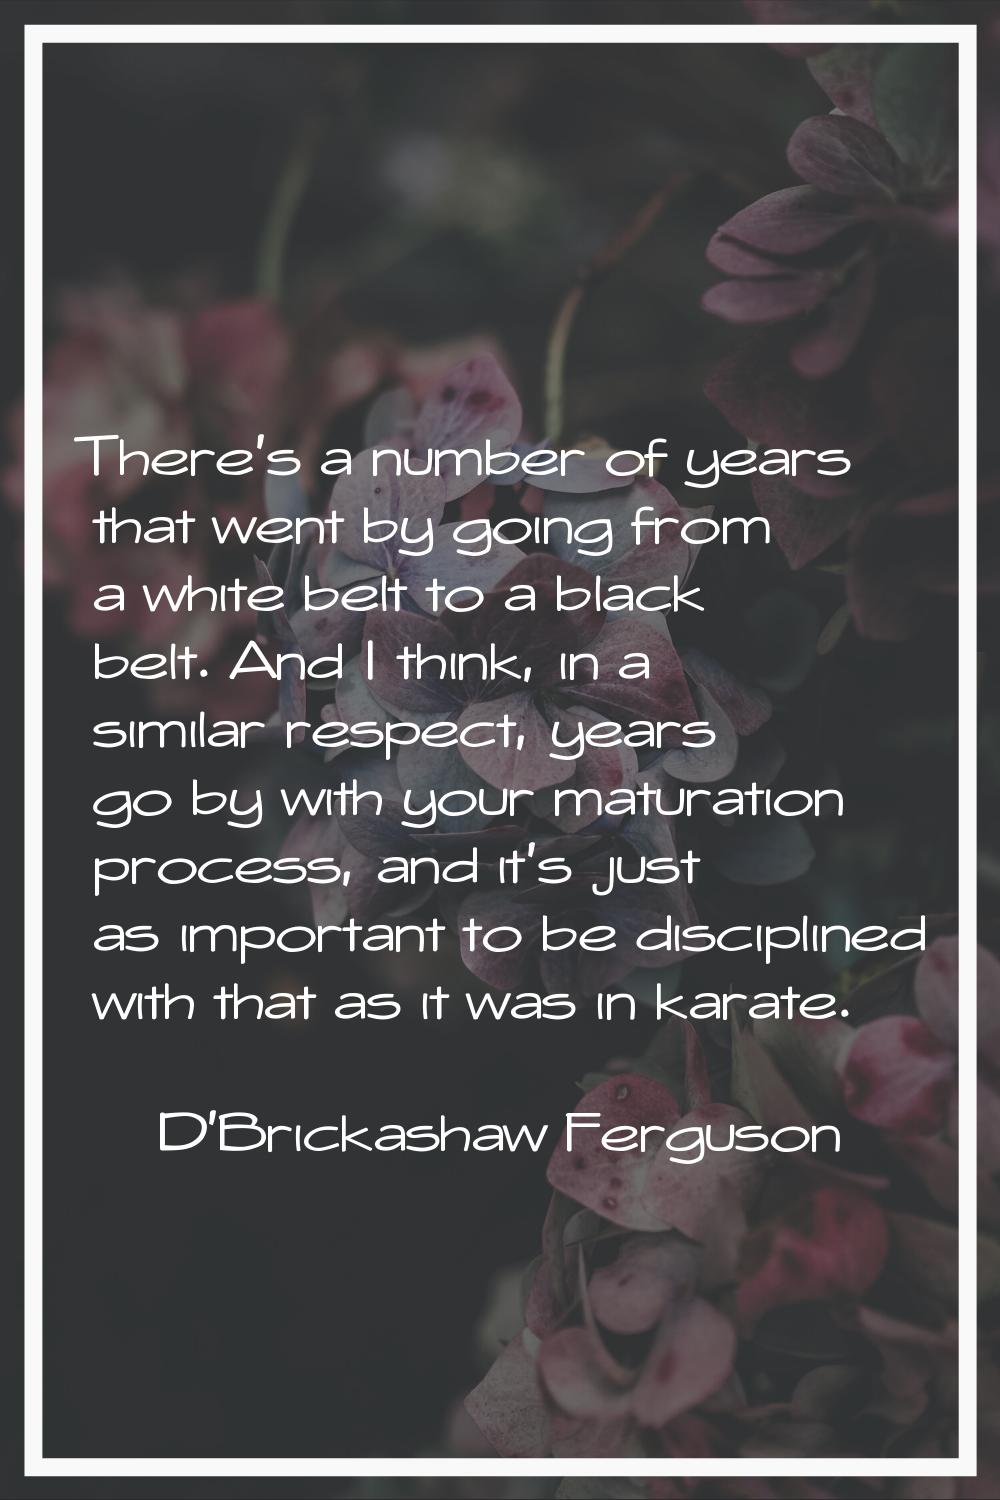 There's a number of years that went by going from a white belt to a black belt. And I think, in a s